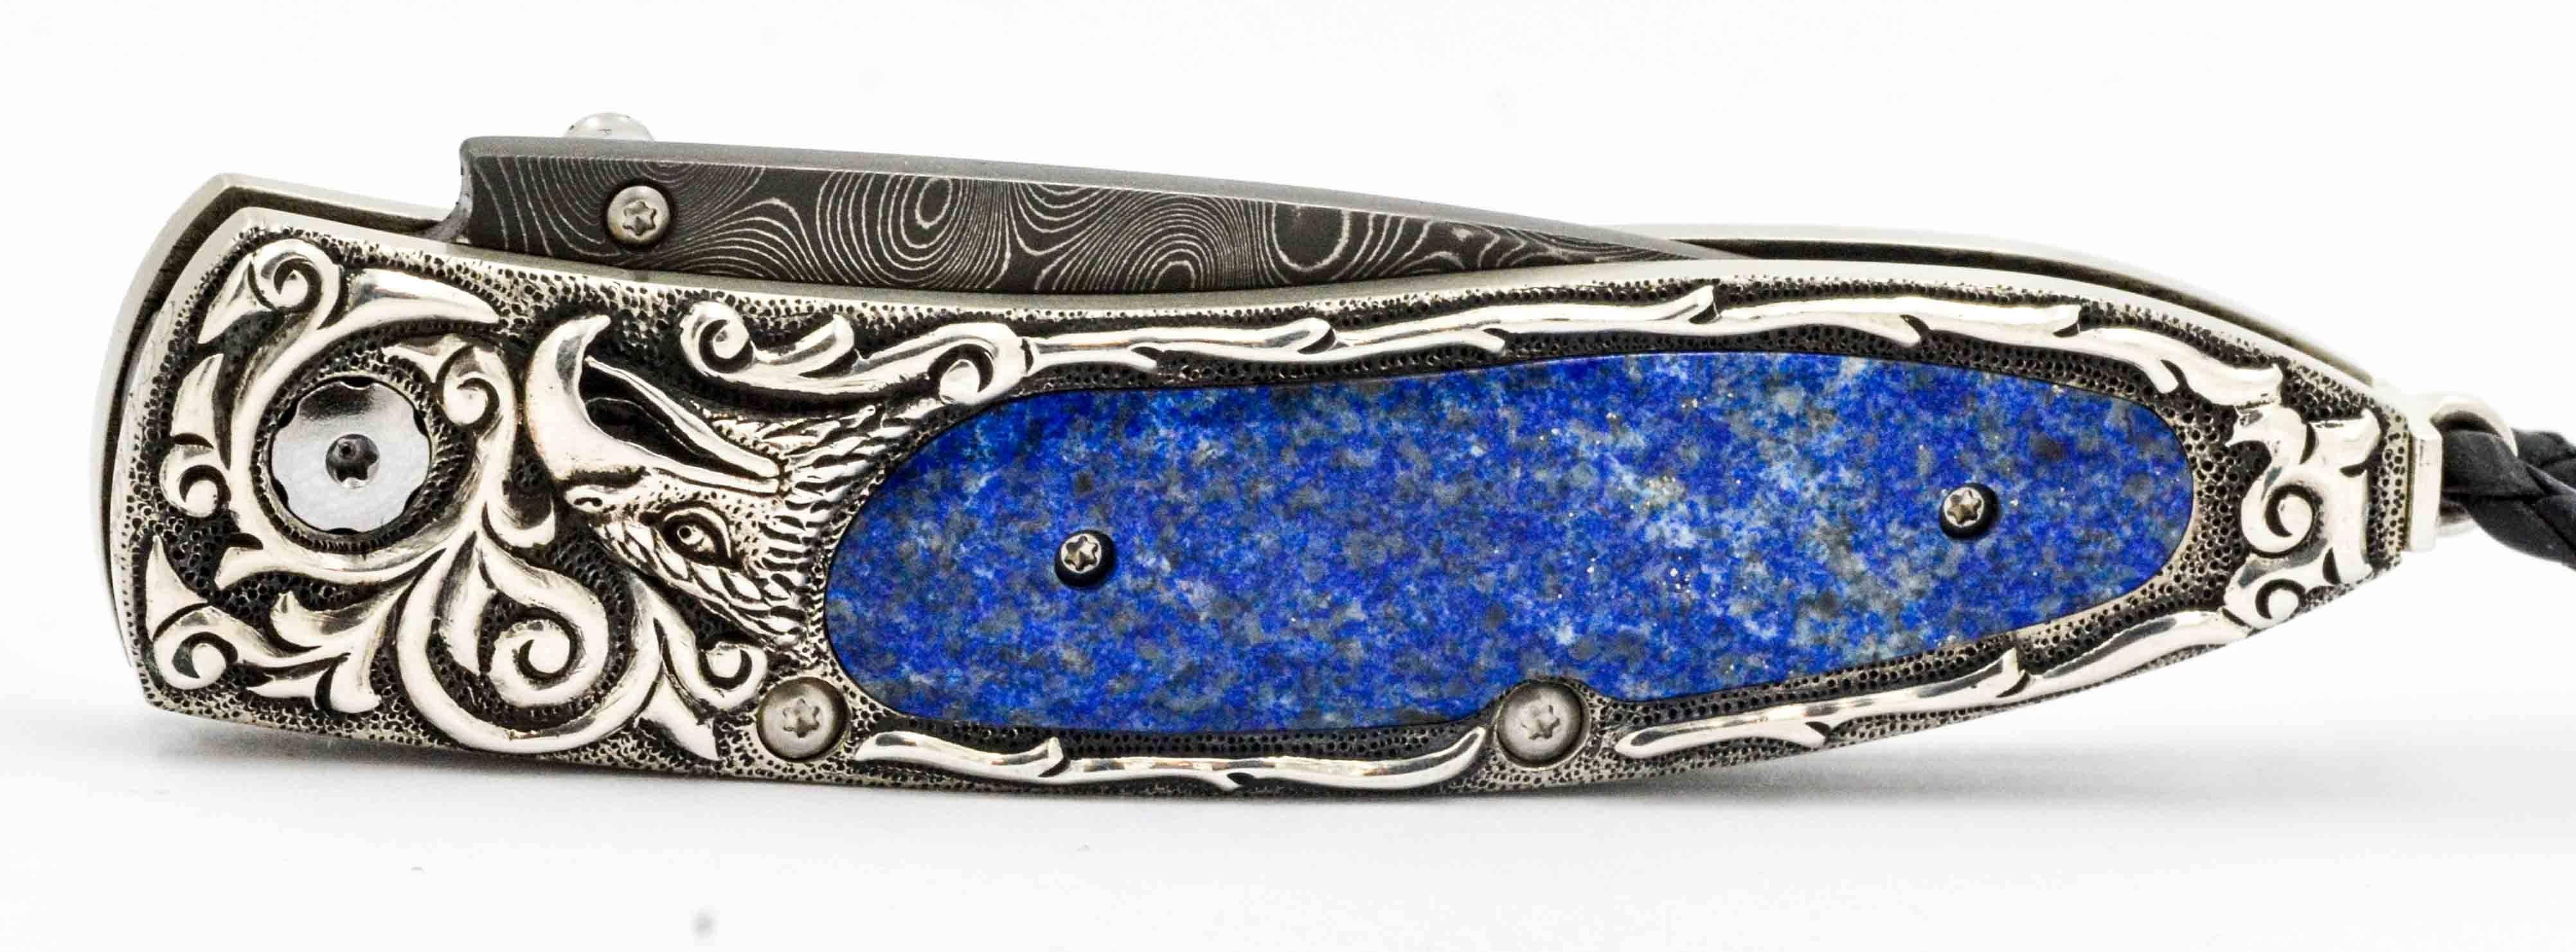 William Henry Damascus Steel Folding Knife with Carve Bolster and Lapis Handle 2